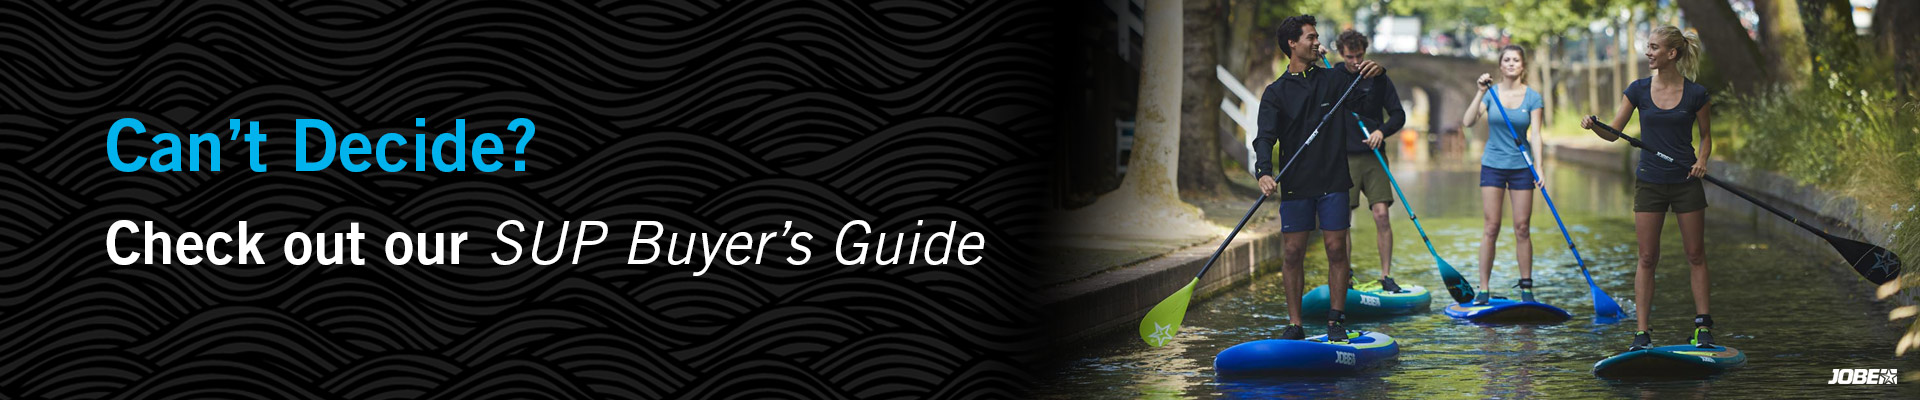 Can't Decide? Check out our SUP Buyer's Guide